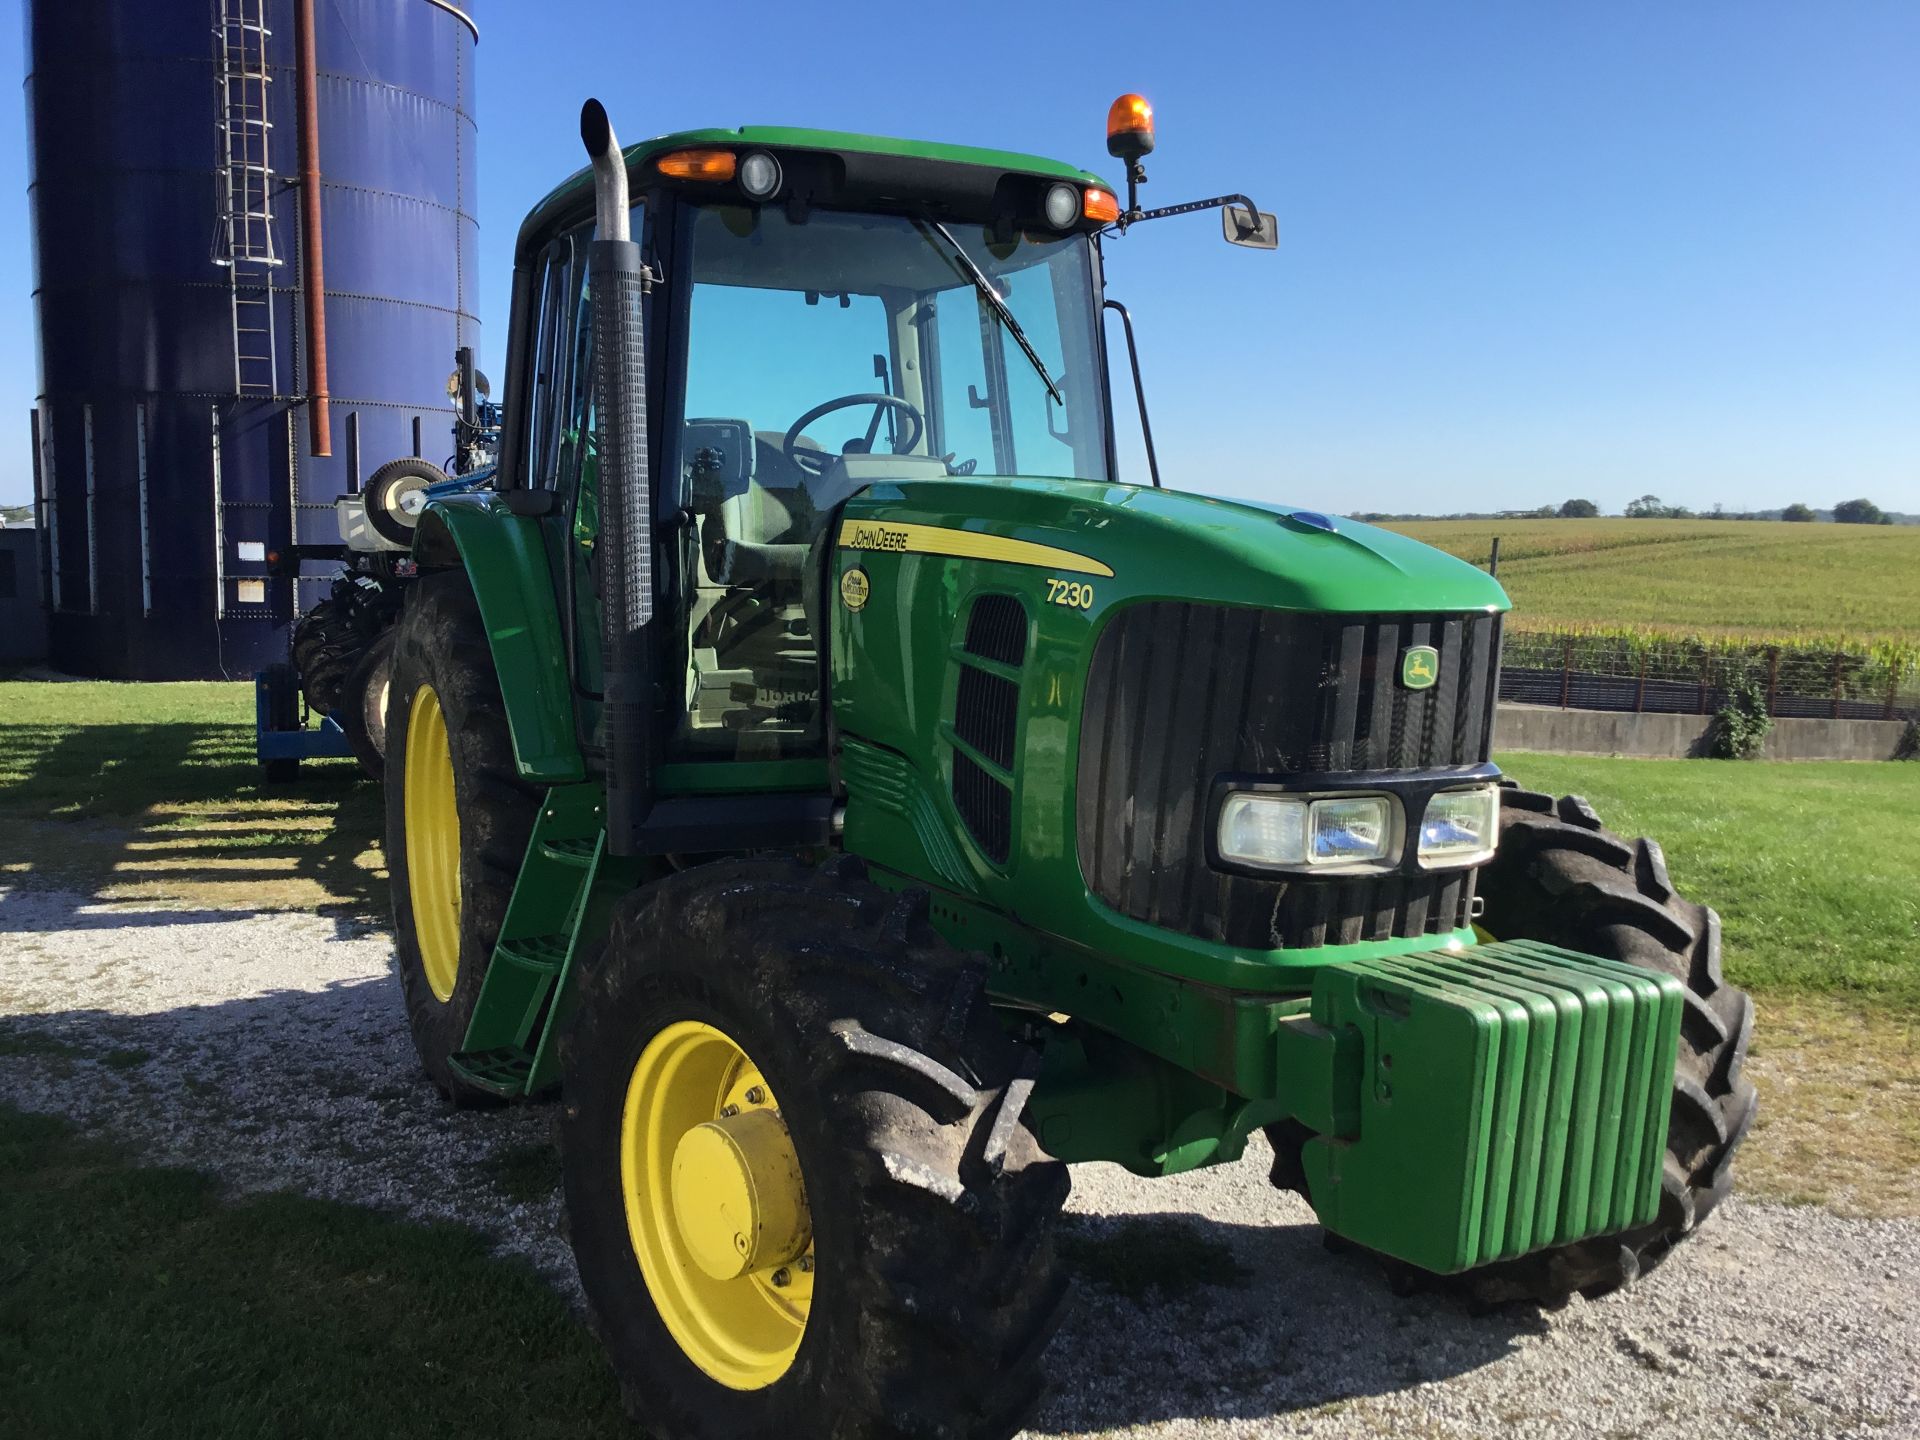 2009 JD 7230 MFWD, 24 Speed Trans, 3 Hyd. Remotes, 1000 PTO, 8 Front Wts., 460/85R38 Rear Tires, - Image 11 of 16